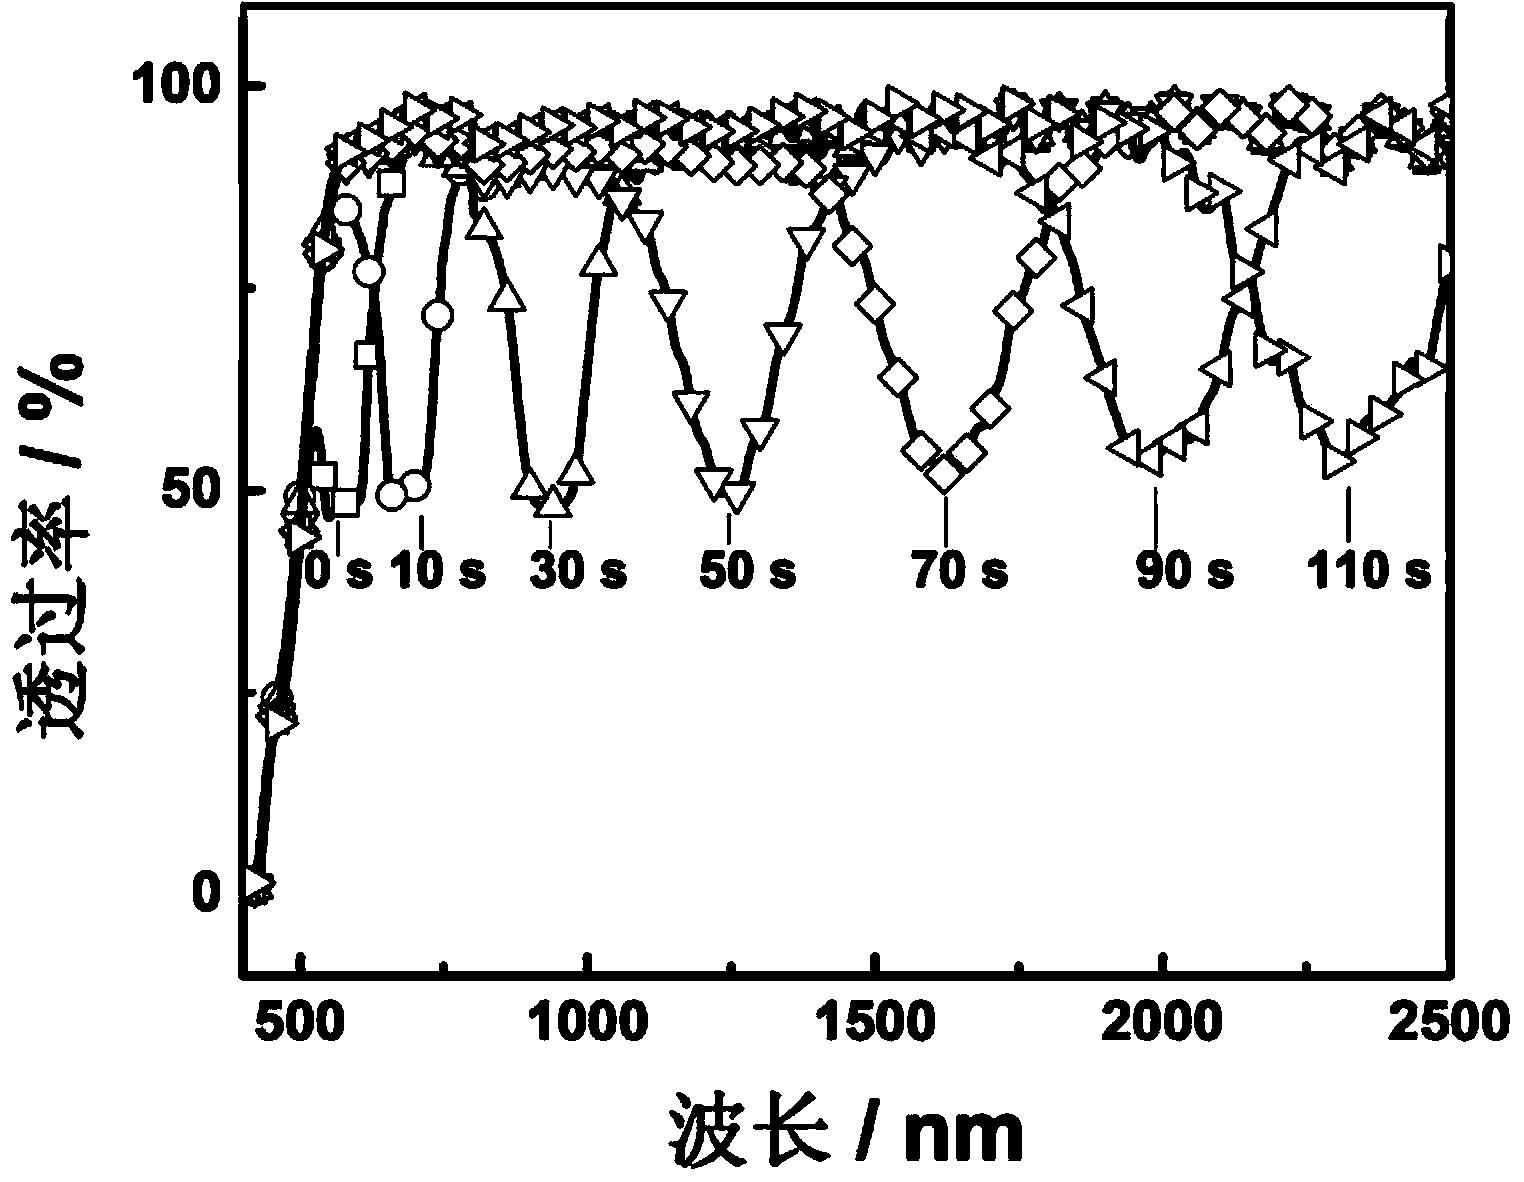 Multi-reflection-band layered cholesteric liquid crystal composite film with light response character and process